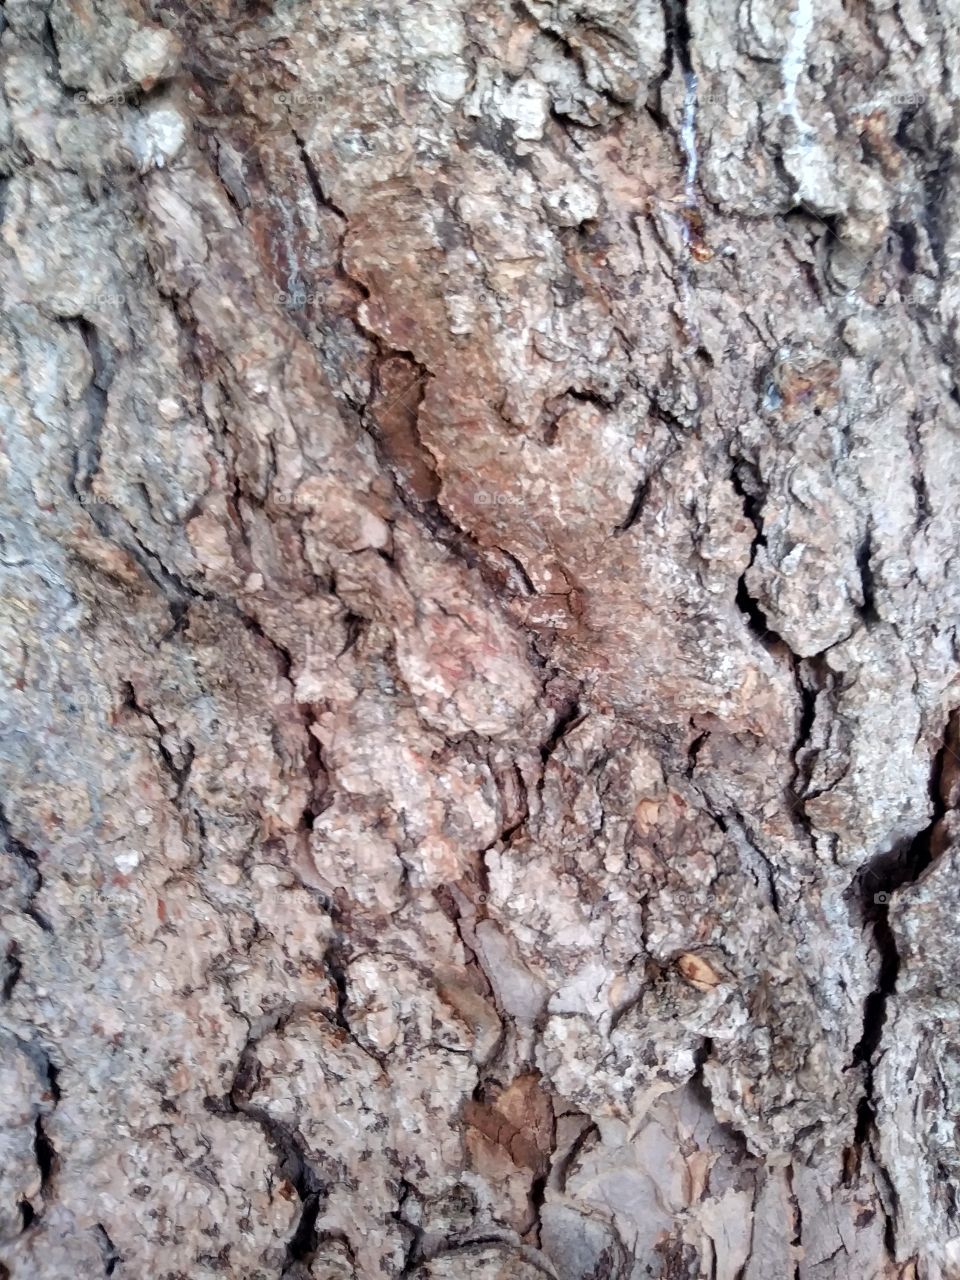 The bark of a pine tree